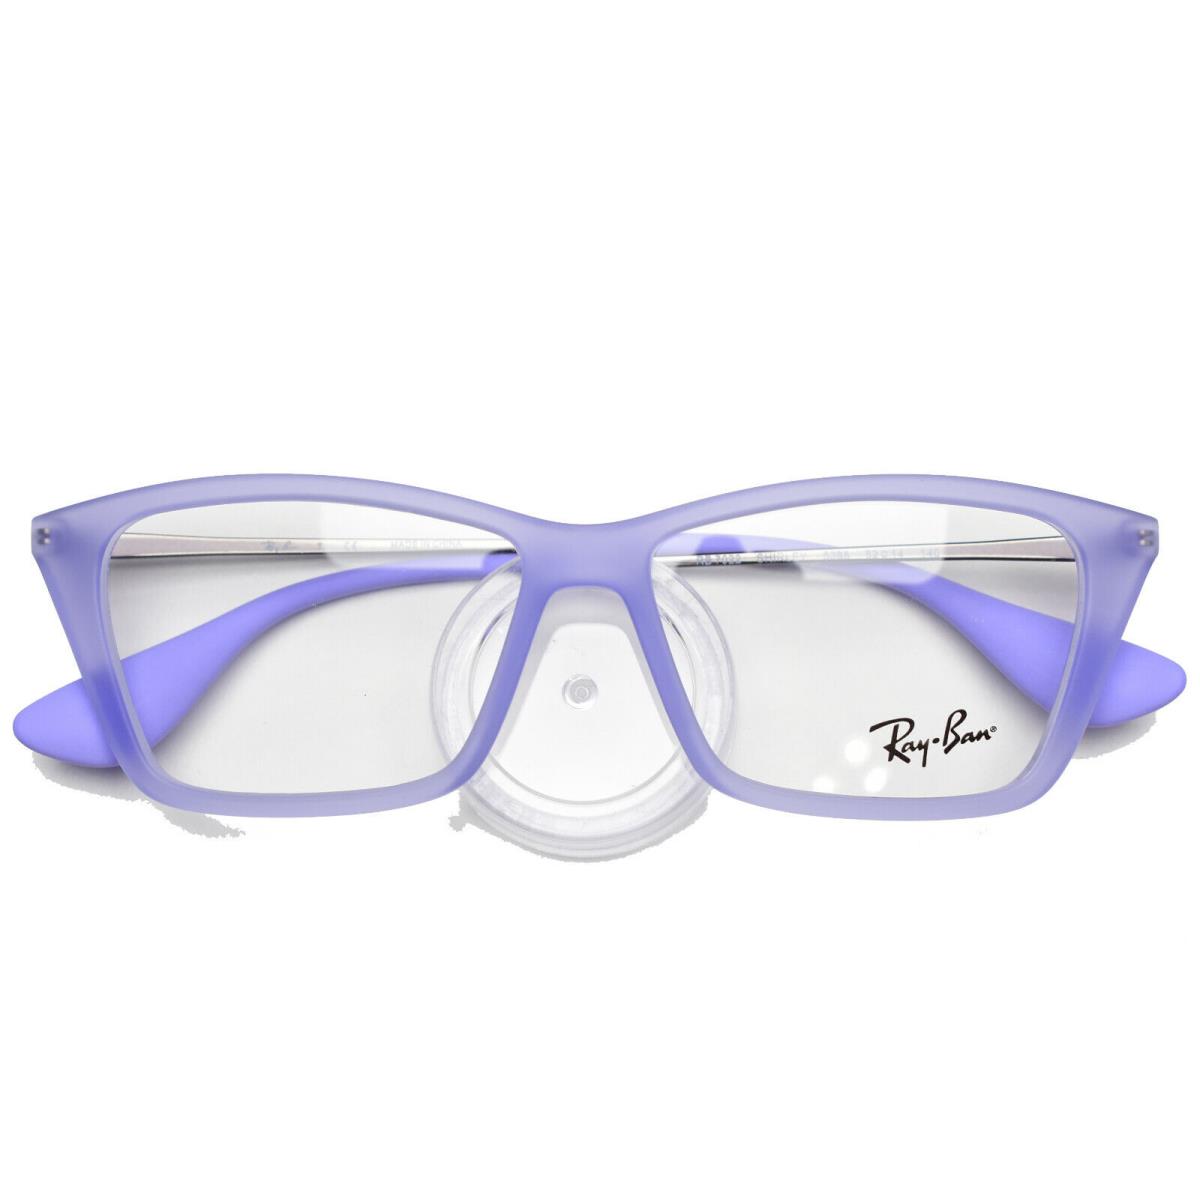 Ray-ban 7022 5368 Icy Purple Eyeglasses Frames Only 52-14-140